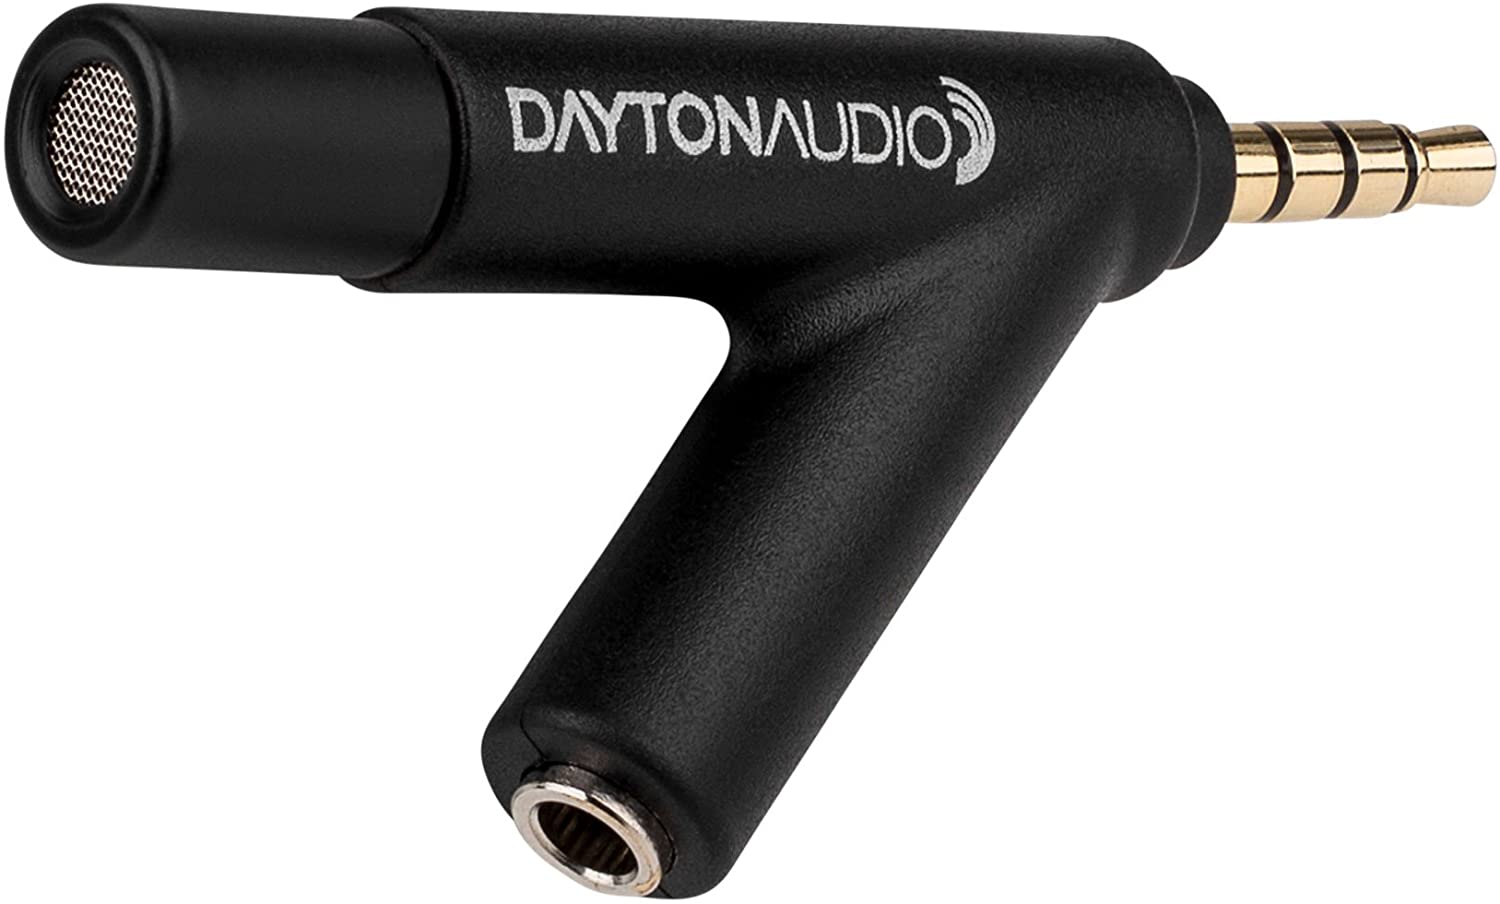 [Open Box] Dayton Audio iMM-6 Calibrated Measurement Microphone for iPhone, iPad Tablet and Android